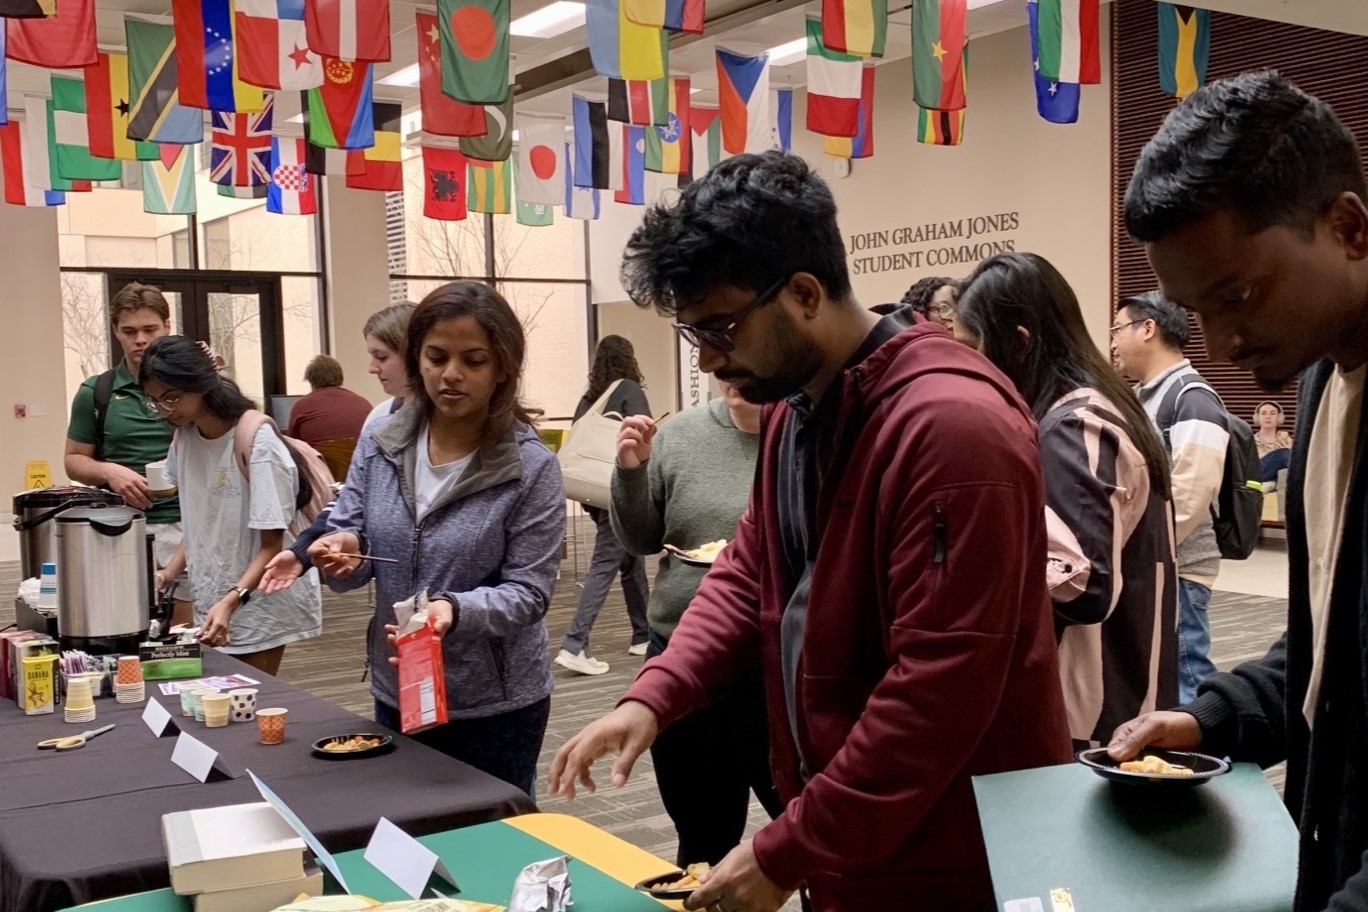 Students in line at buffet in front of flags.